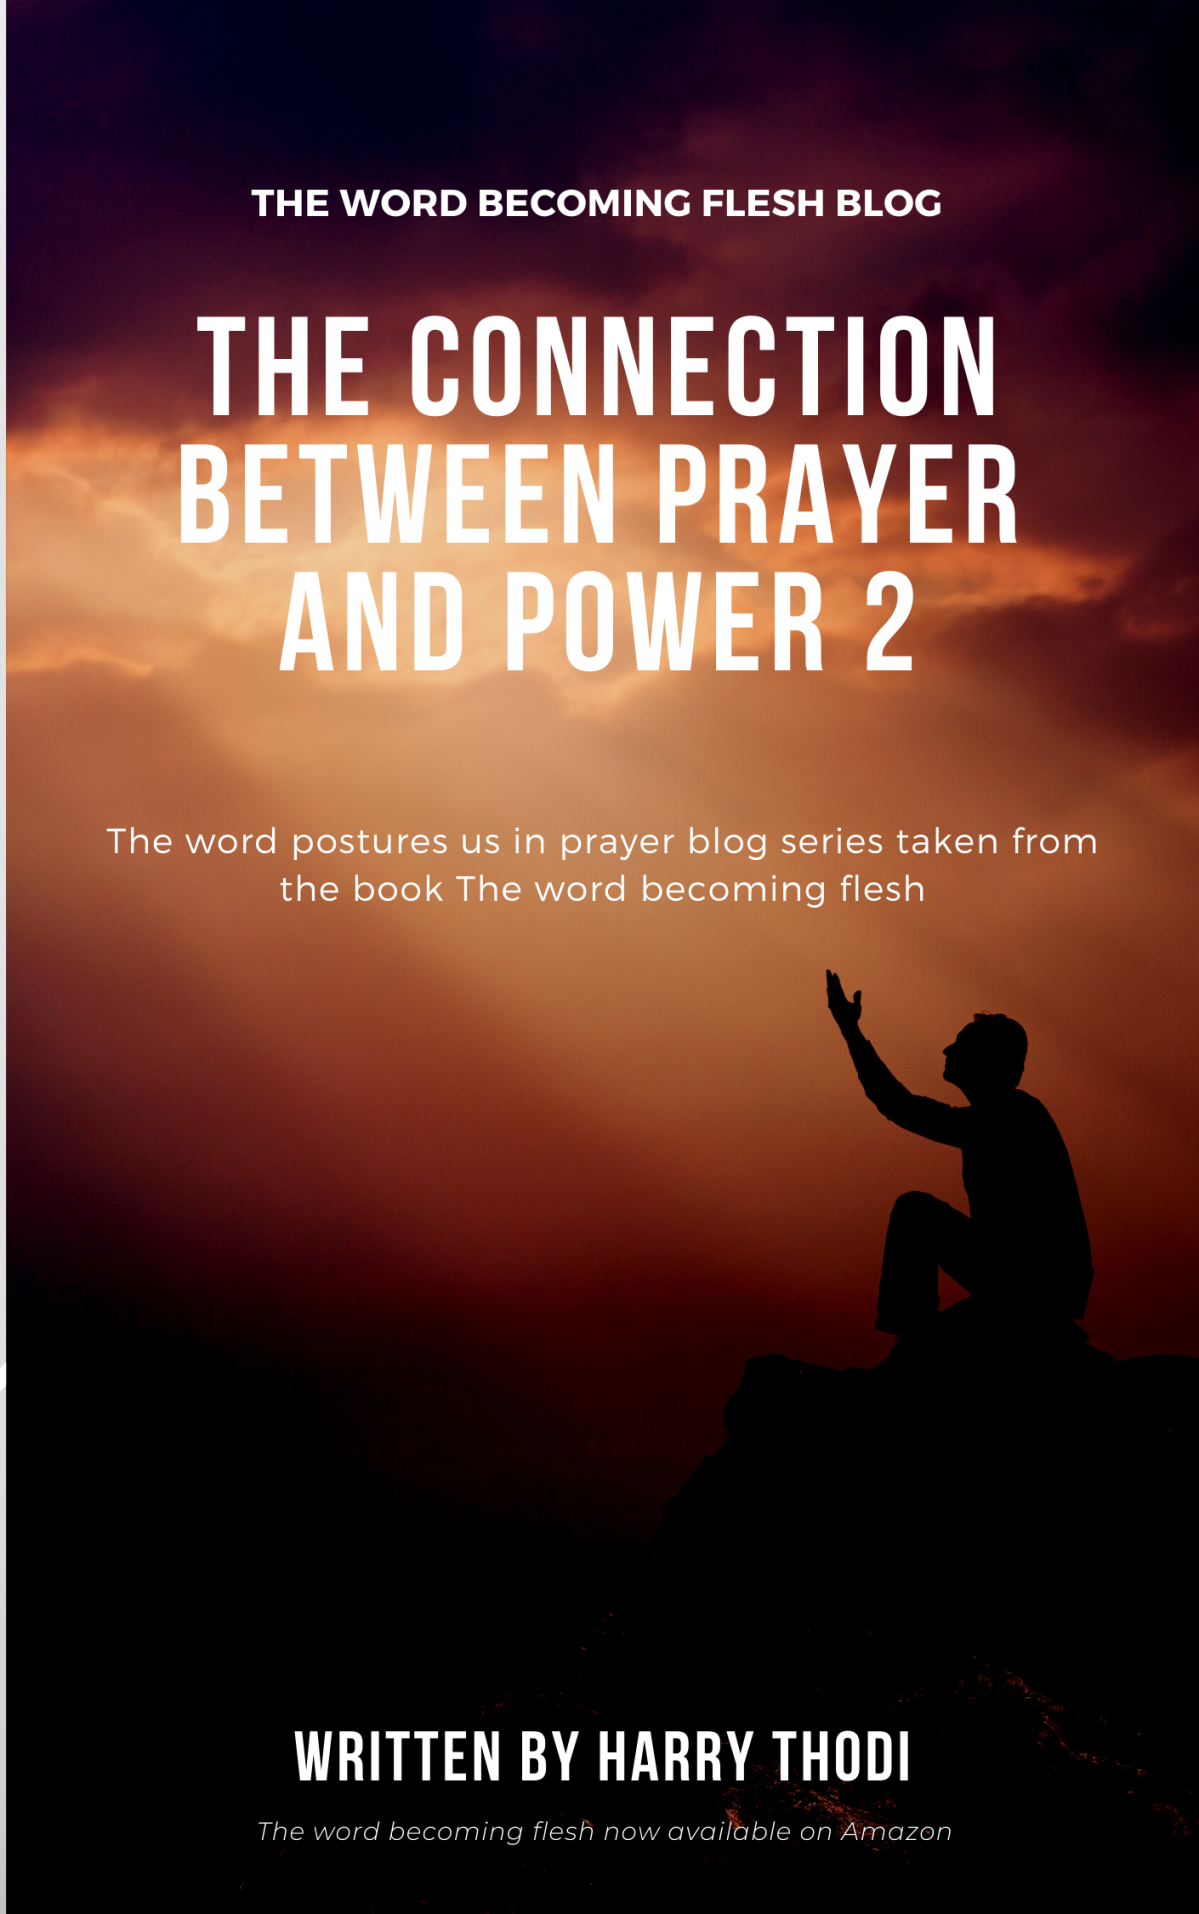 The Connection Between Prayer and Power 2